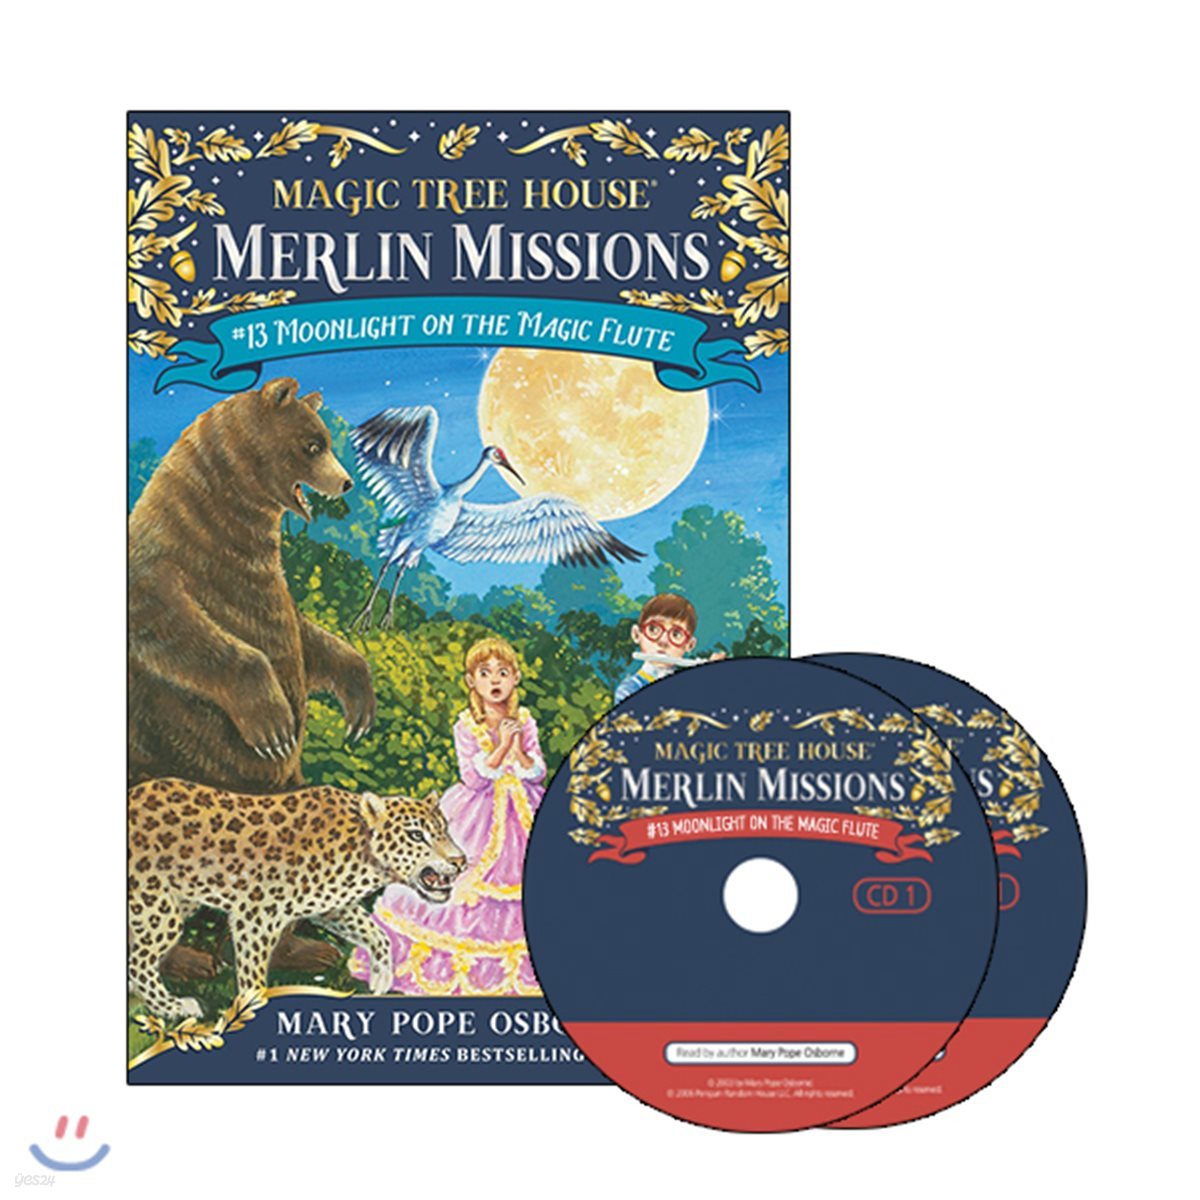 Merlin Mission #13 : Moonlight on the Magic Flute (Book + CD)